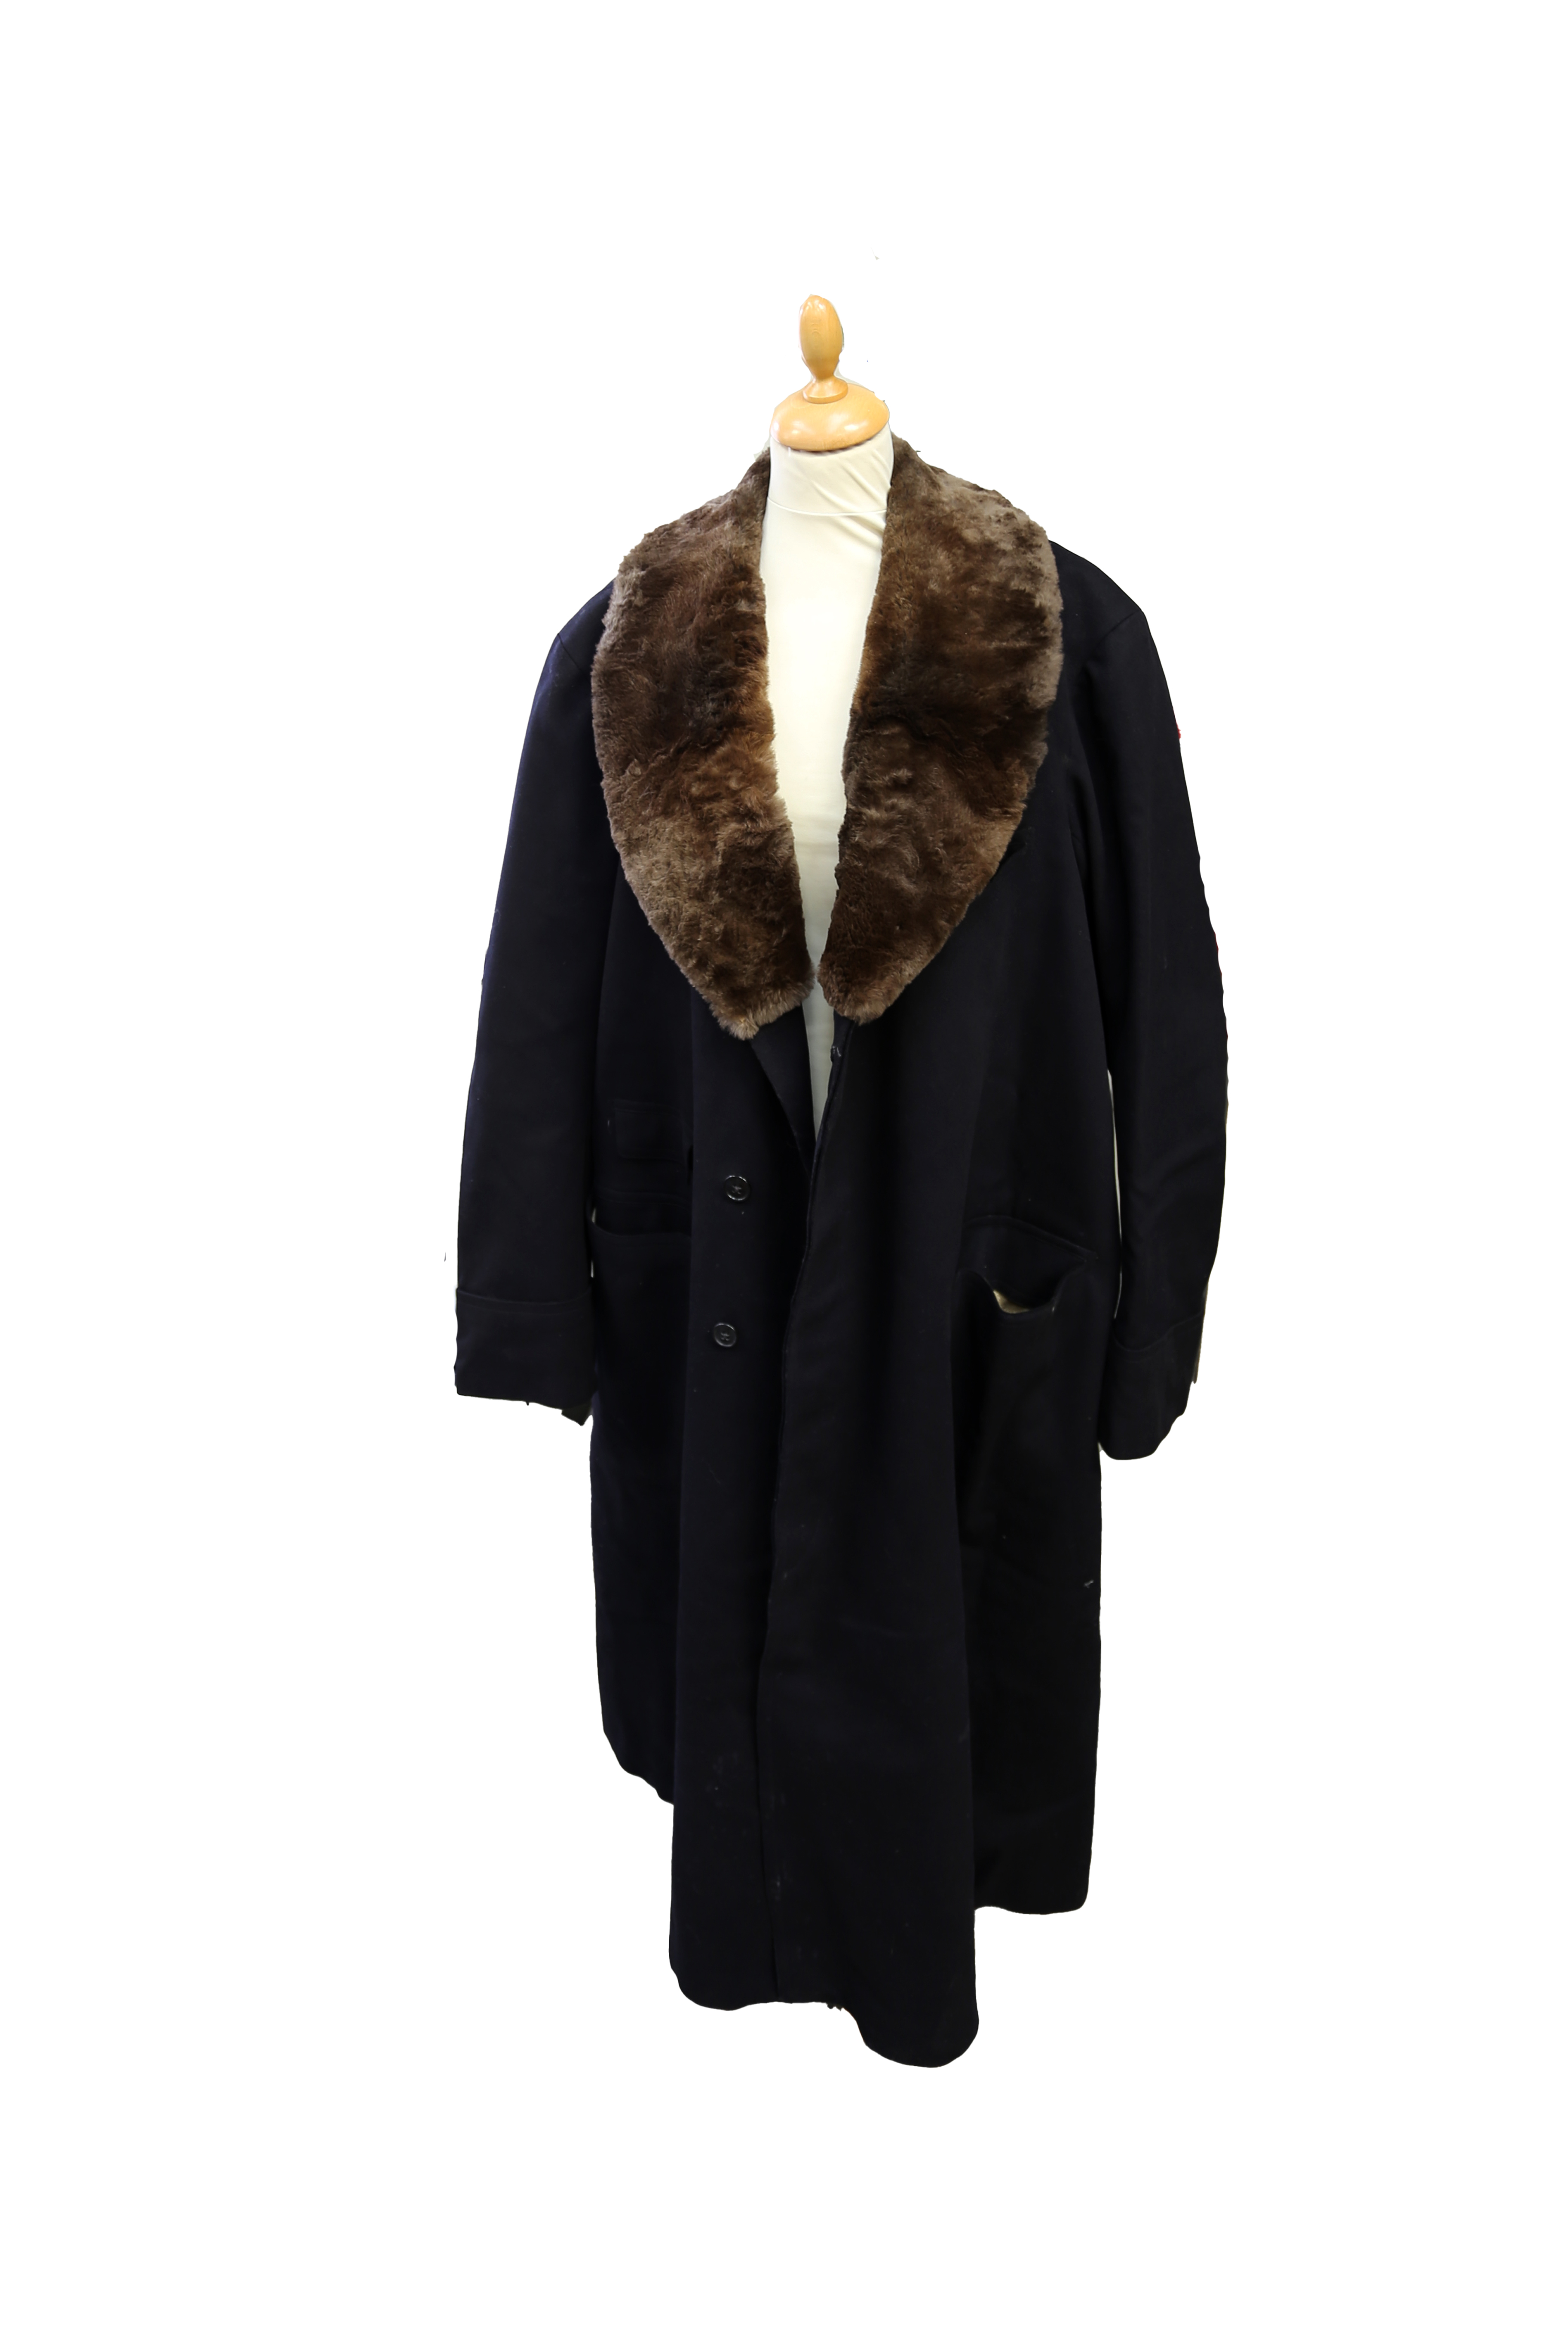 A 19th century, gentleman’s overcoat, circa 1870’s / 1880’s. Once the property of the British